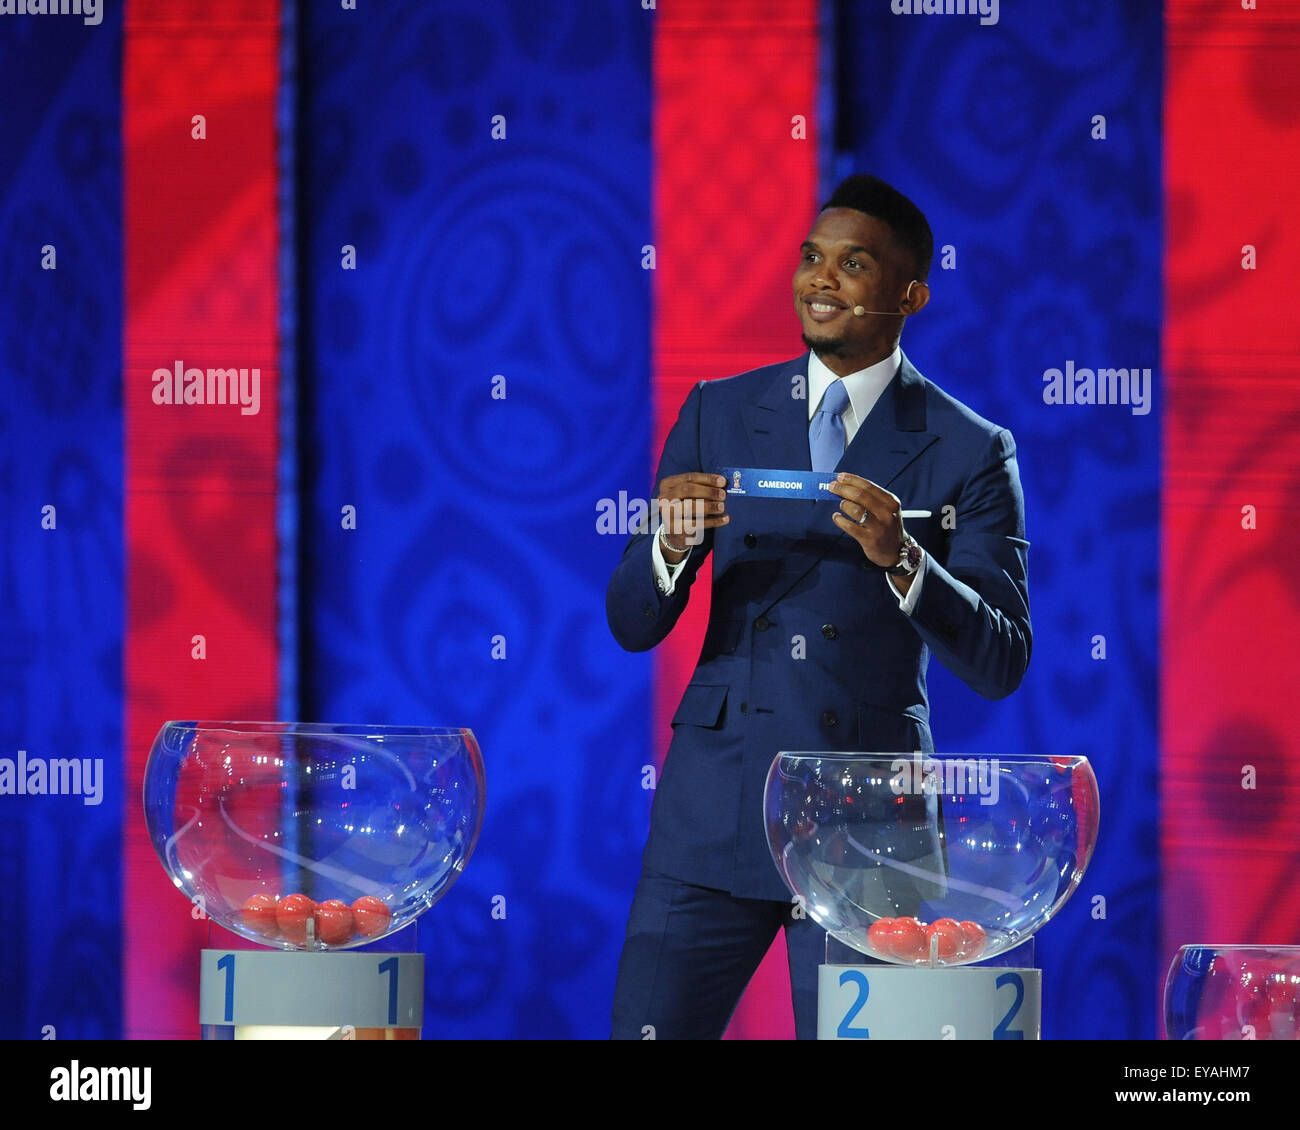 St.Petersburg. 25th July, 2015. Cameroon's soccer player Samuel Eto'o holds up the slip showing 'Cameroon' during the preliminary draw for the 2018 FIFA World Cup at Konstantin Palace in St. Petersburg, Russia July 25, 2015. Credit:  Dai Tianfang/Xinhua/Alamy Live News Stock Photo